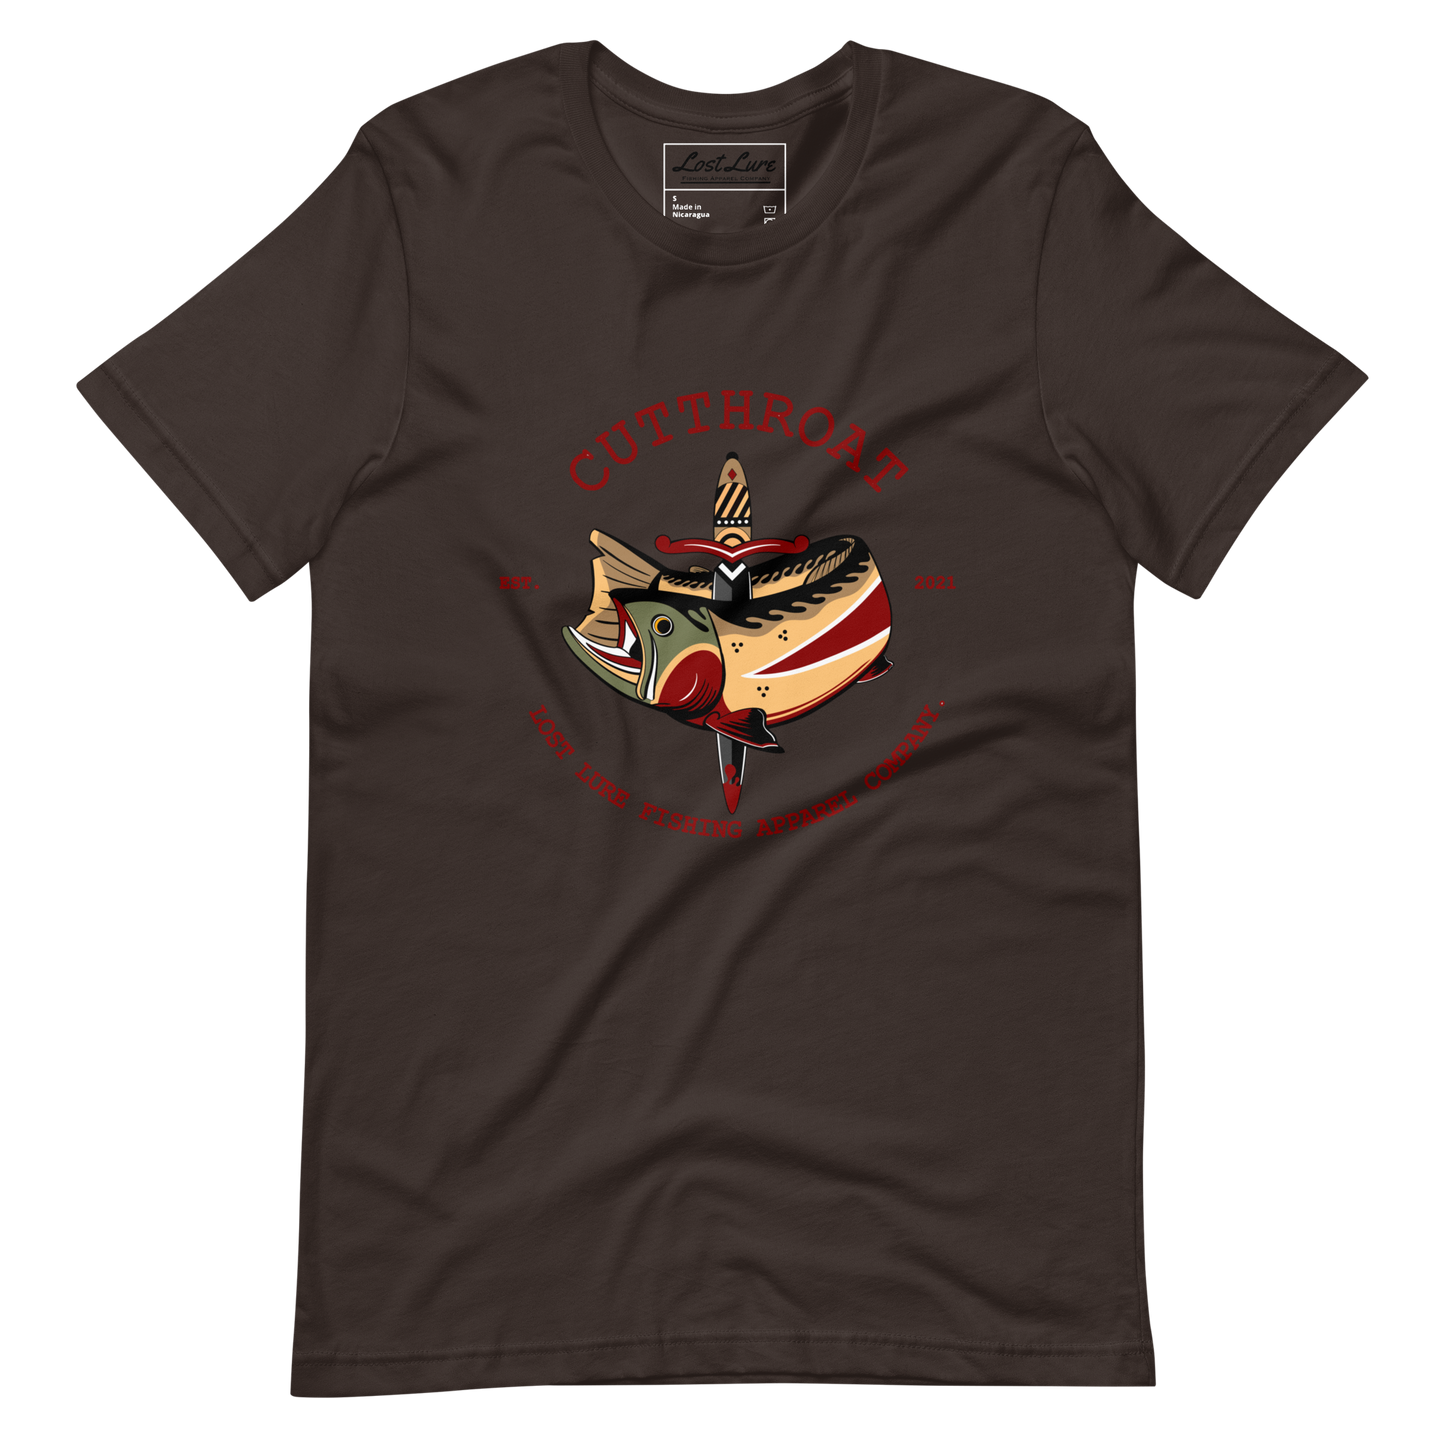 Cutthroat Trout fishing shirt. It’s an American traditional style design with a cutthroat trout and a dagger. The shirt reads Cutthroat trout, est. 2021, lost lure fishing apparel company. The fishing design is on the front of the shirt. Brown fishing shirt, front side